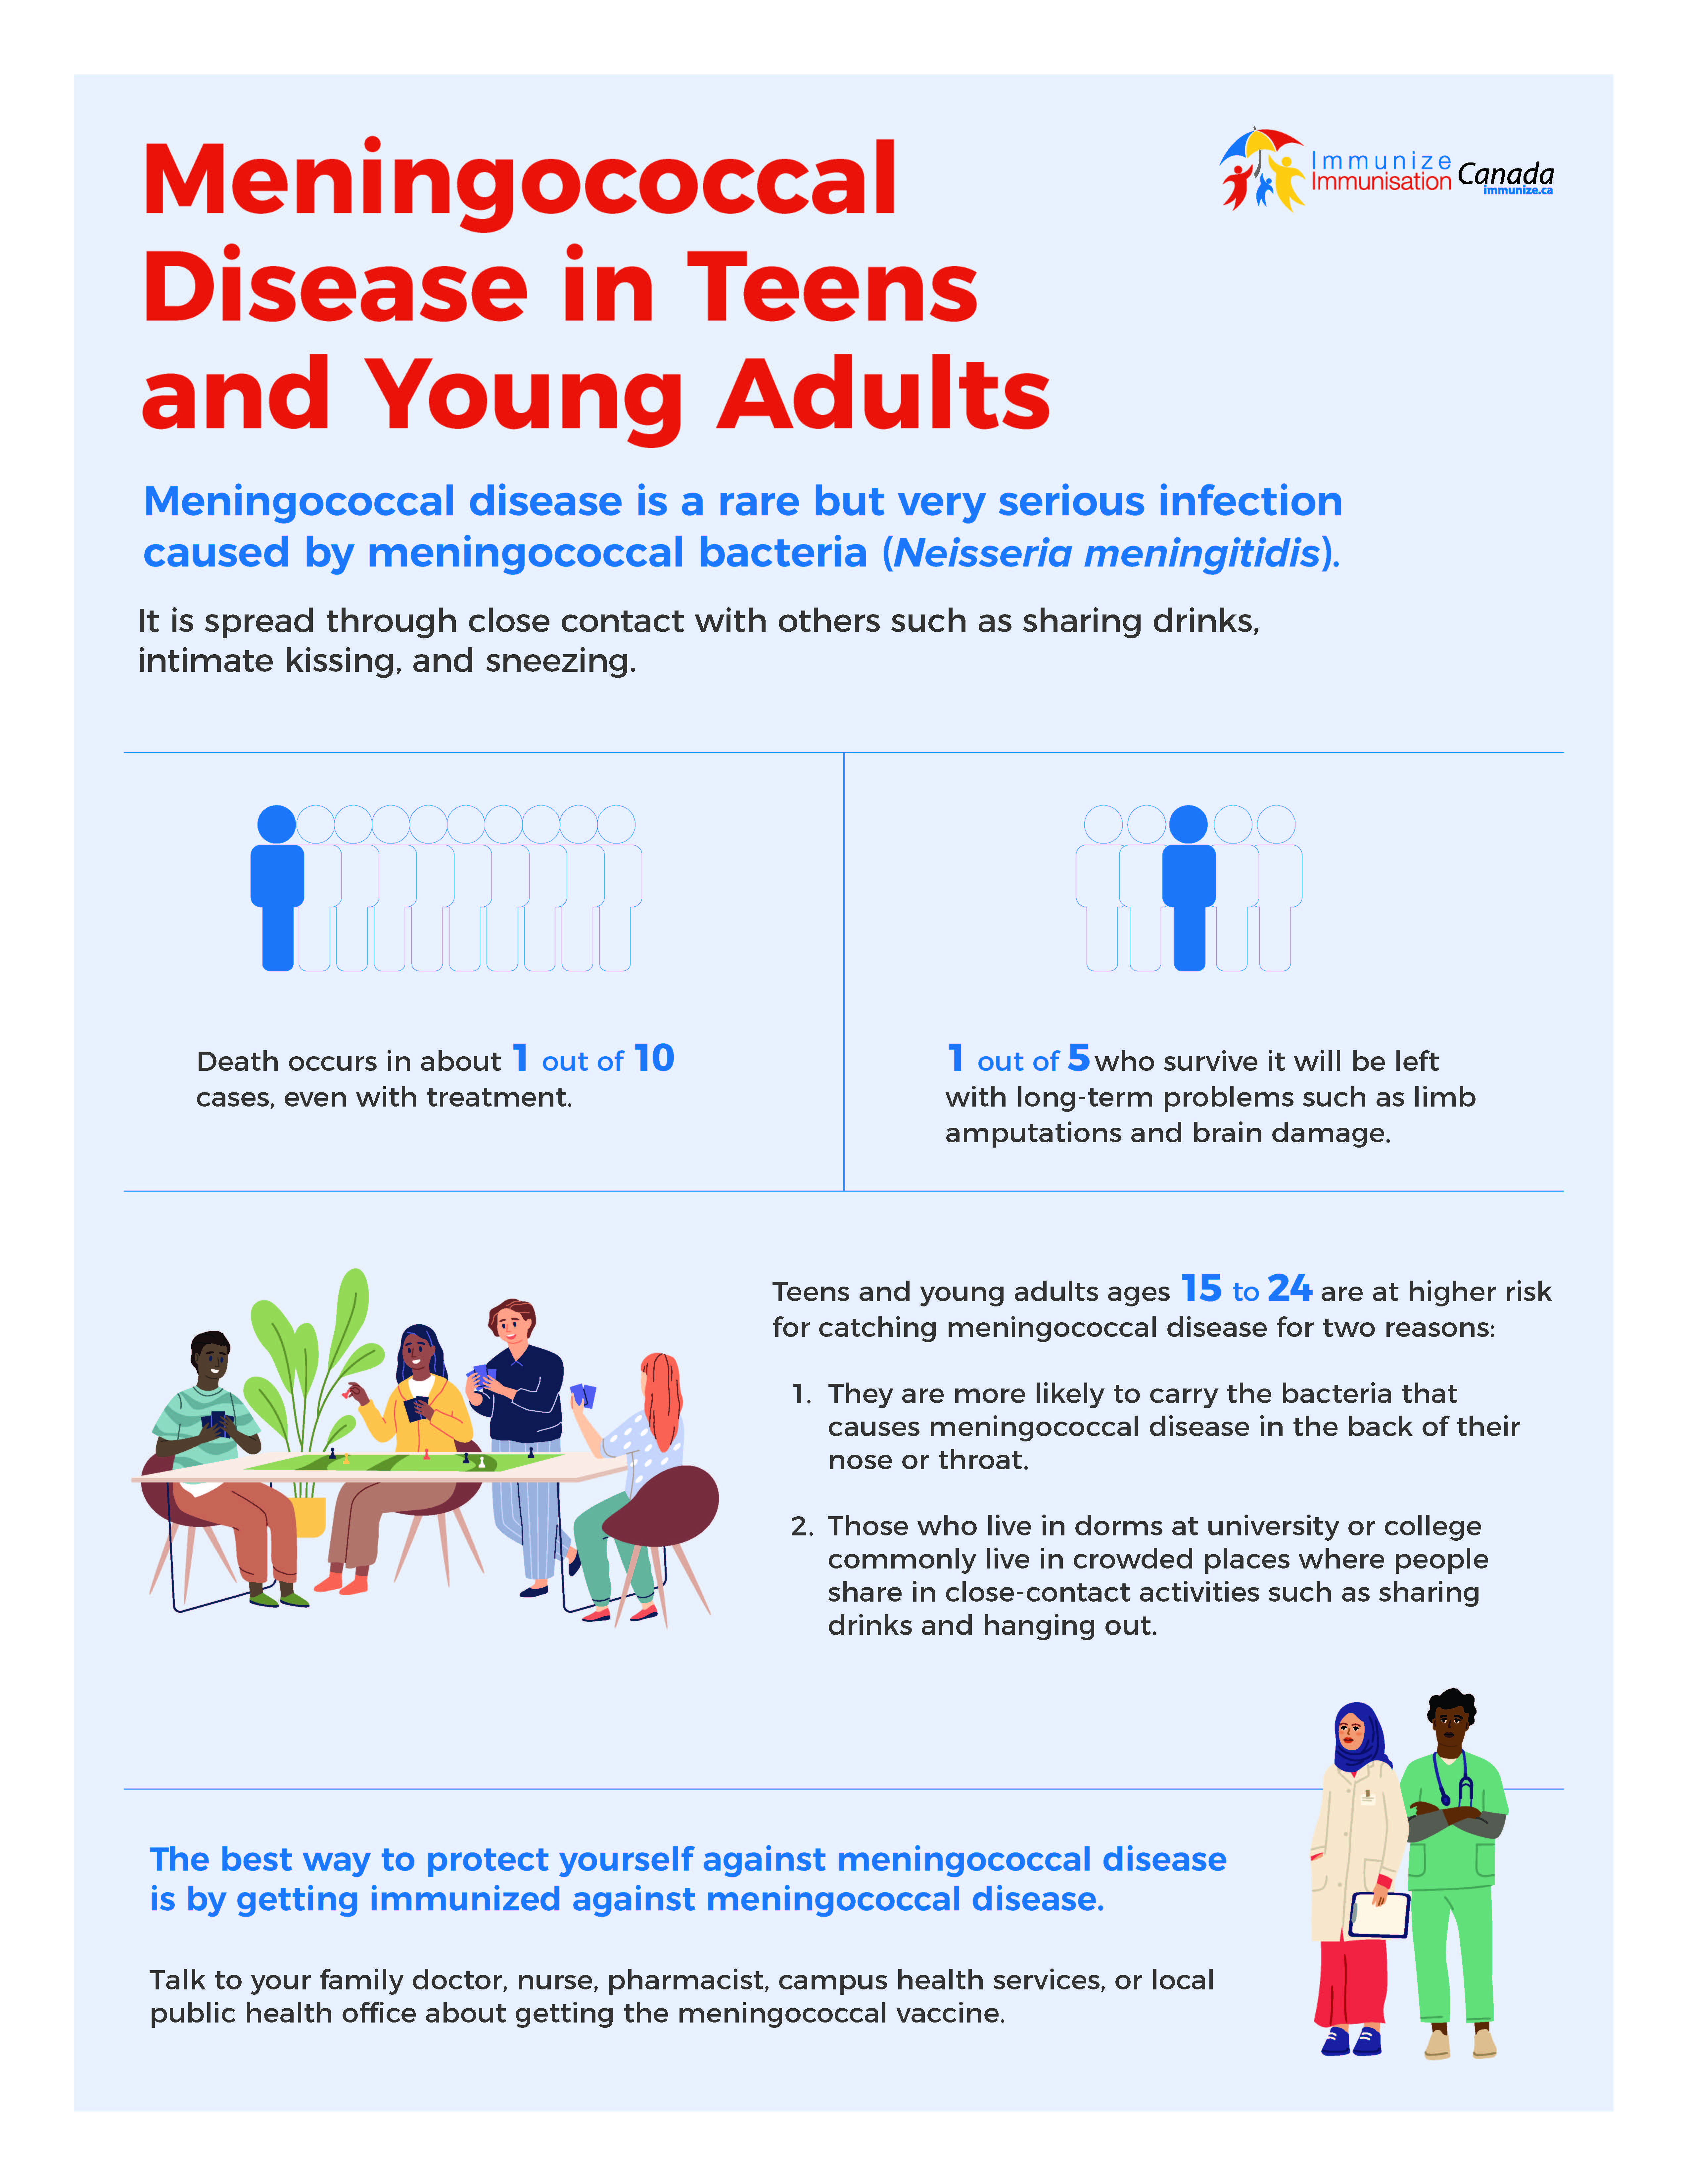 Meningococcal Disease in Teens and Young Adults - infographic